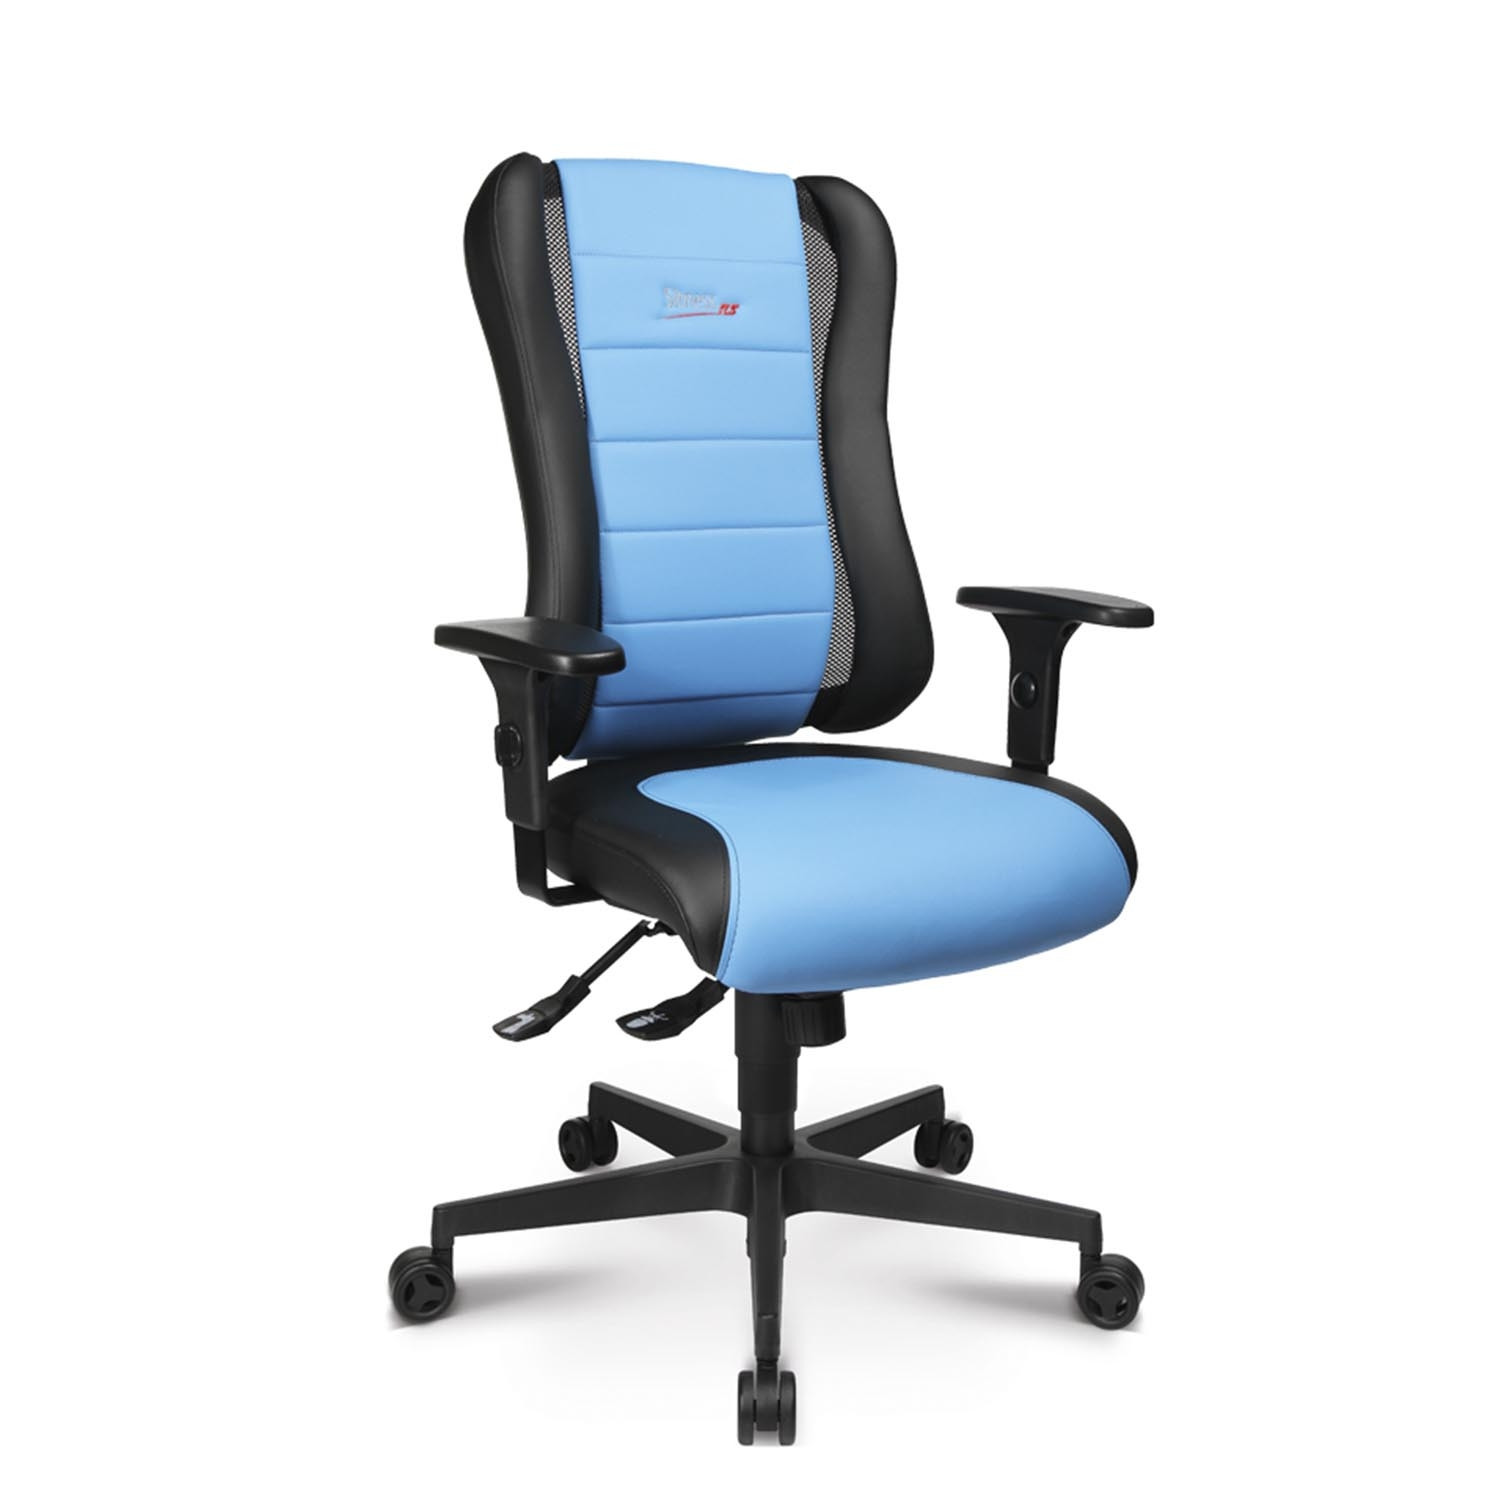 Sitness Racer Chair View Without Headrest